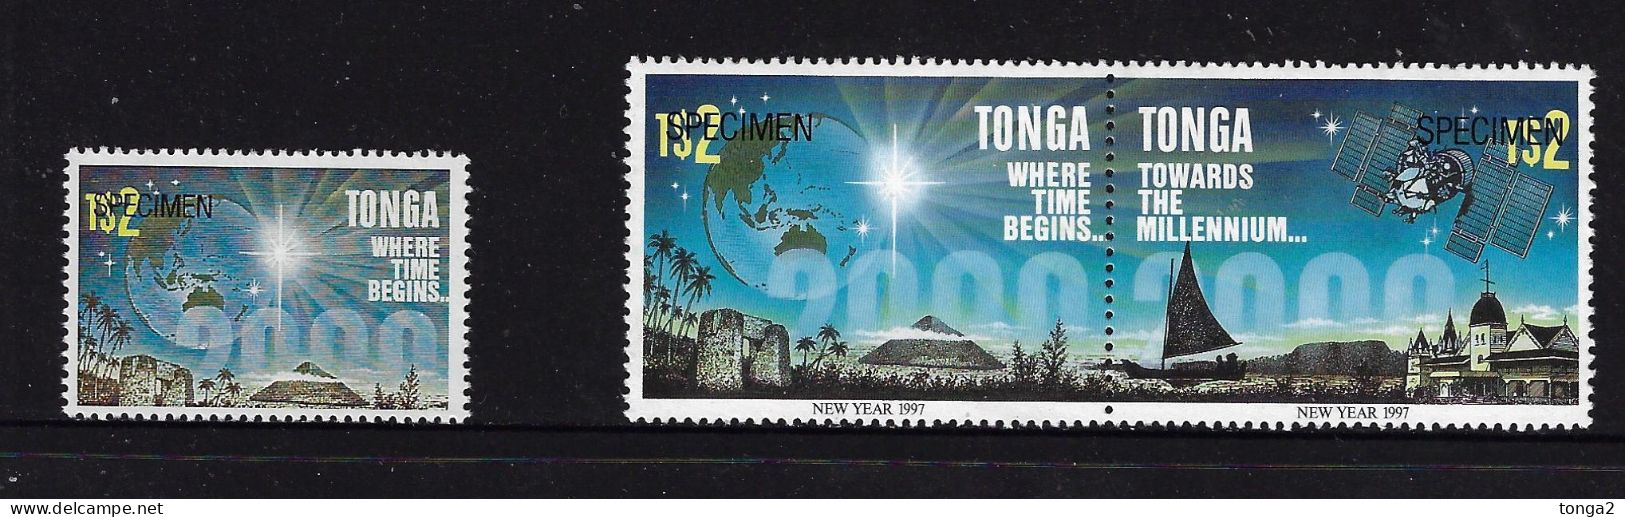 Tonga 1996 ESSAY $2.00 Space - Time - Important Read Description For More Details - Oceania